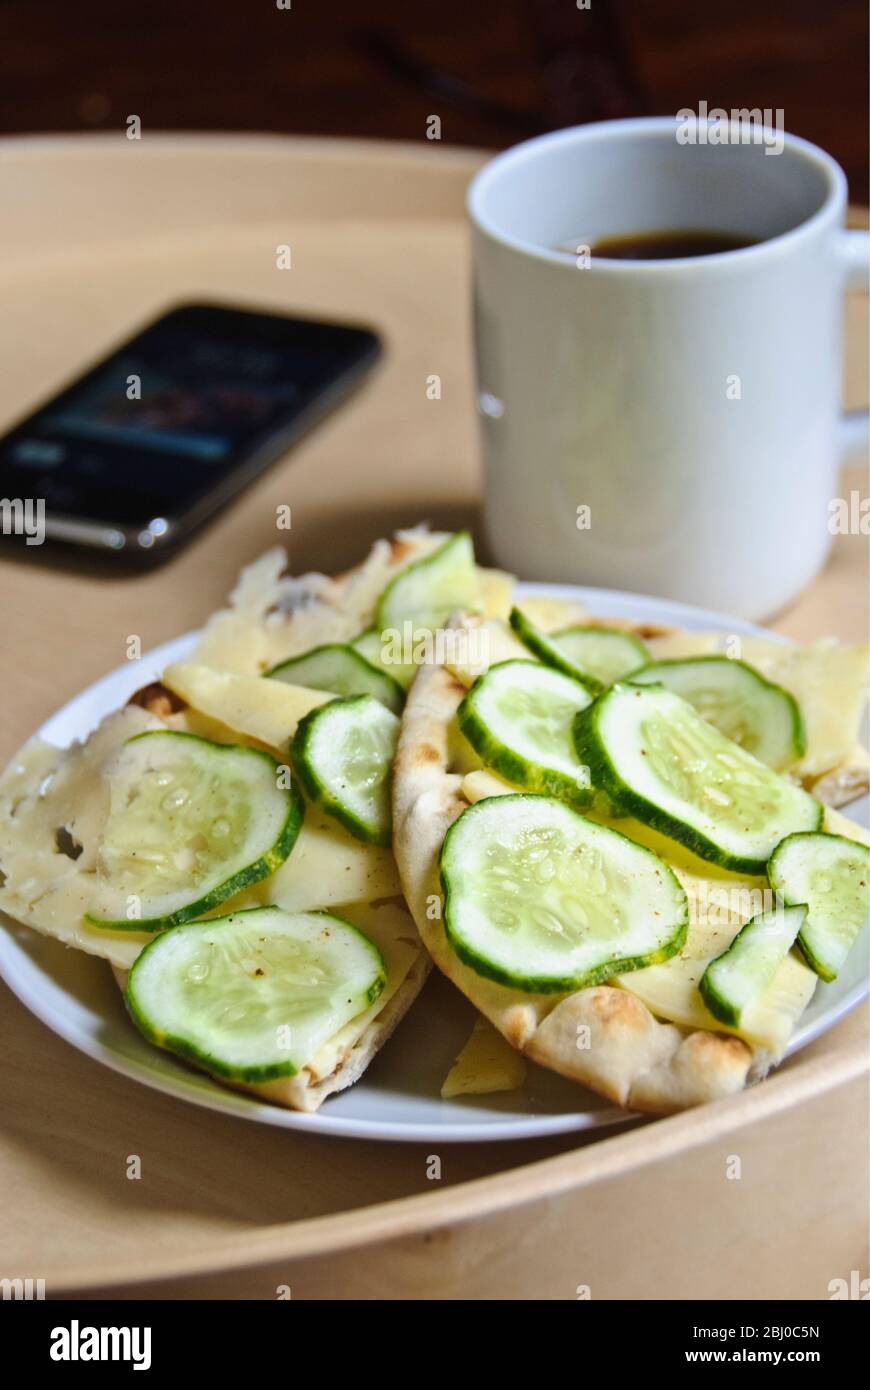 Snack of Scandinavian flatbread, with thinly sliced Swedish cheese and cucumber slices, sprinkled wih herb salt, with cup of black coffee and iphone o Stock Photo